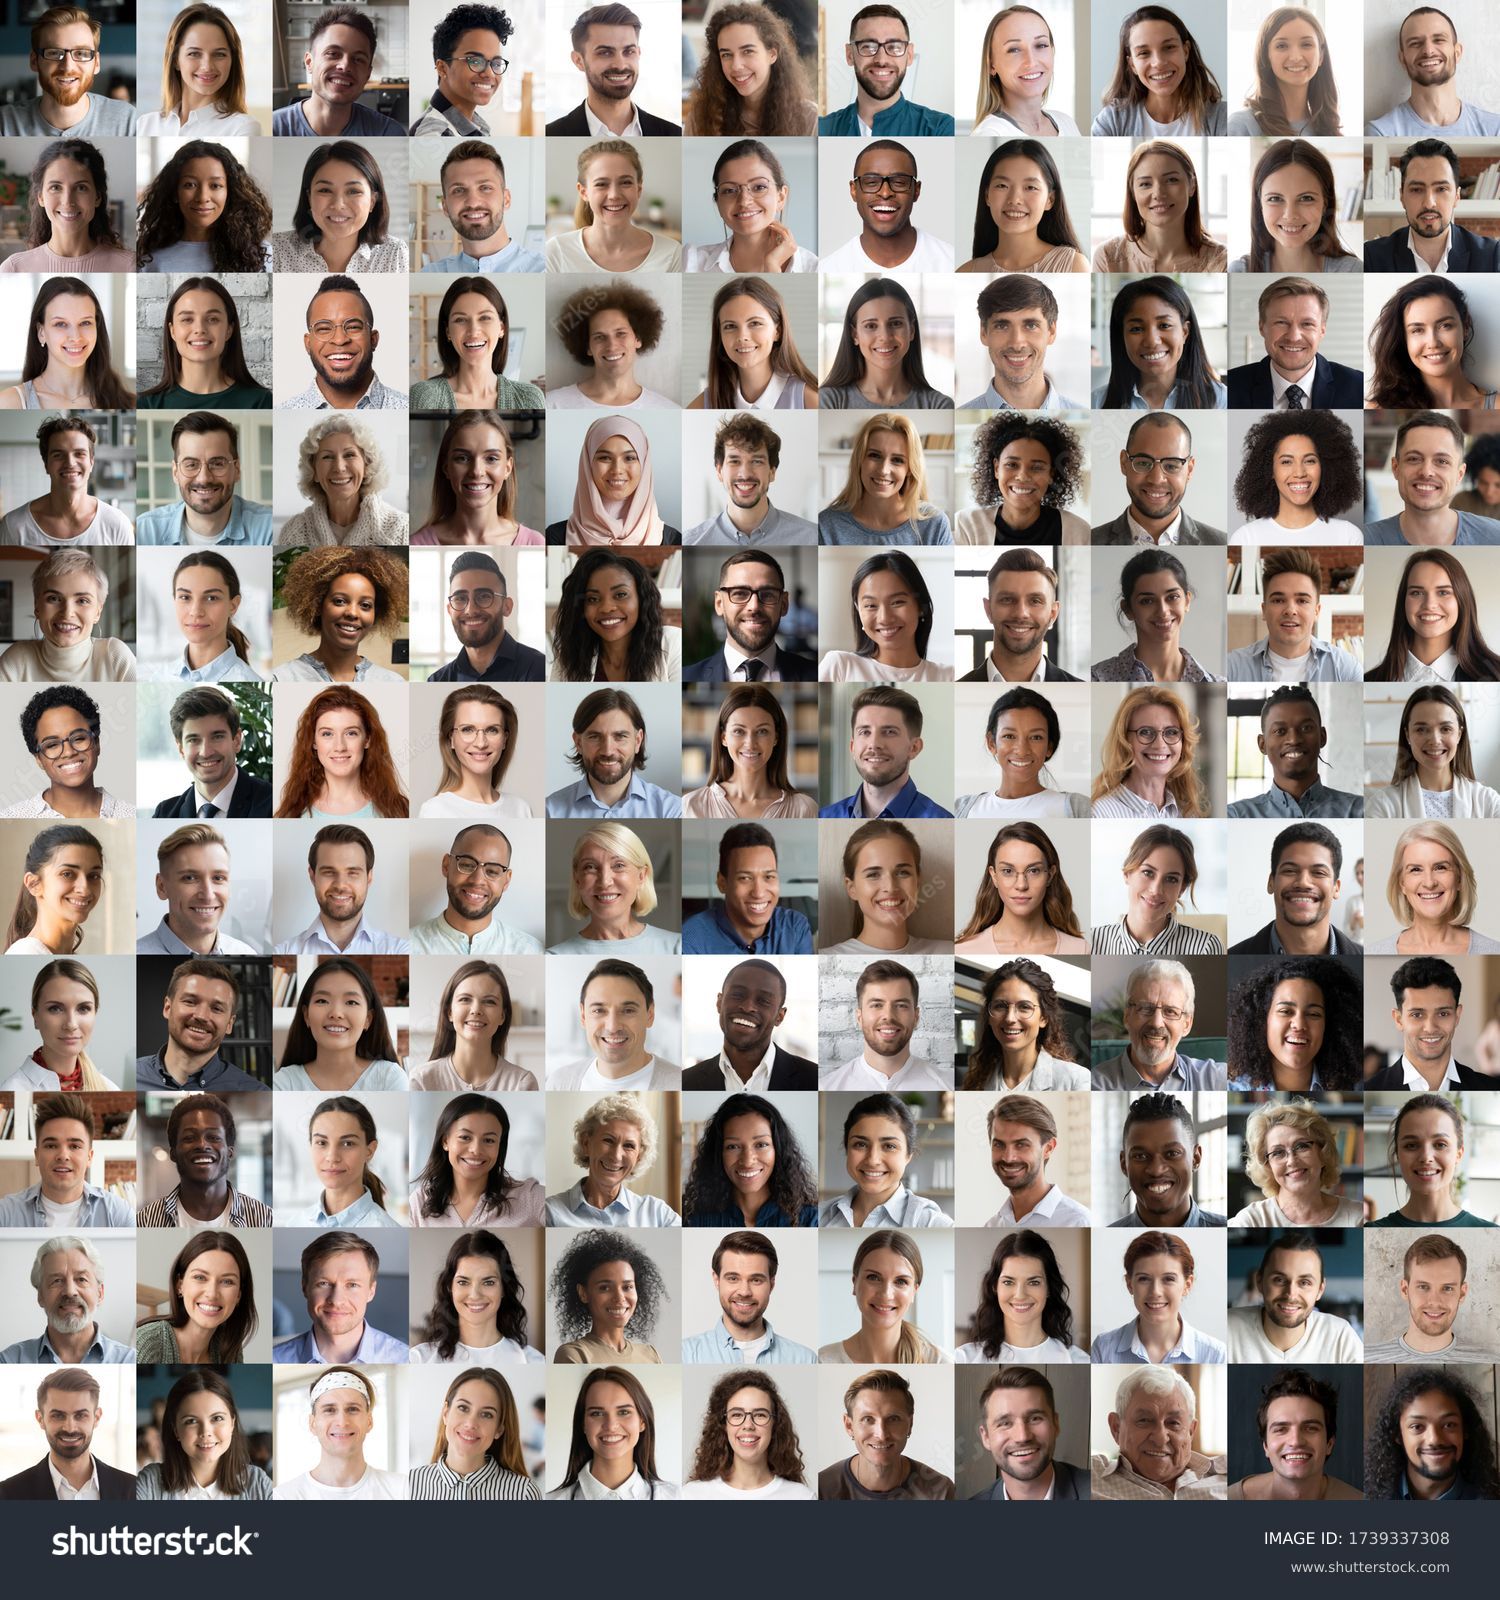 Lot of happy multiracial people looking at camera in square collage mosaic. Many smiling multiethnic faces of young and old diverse ethnic business people group headshots. Hr, staff, society concept. #1739337308